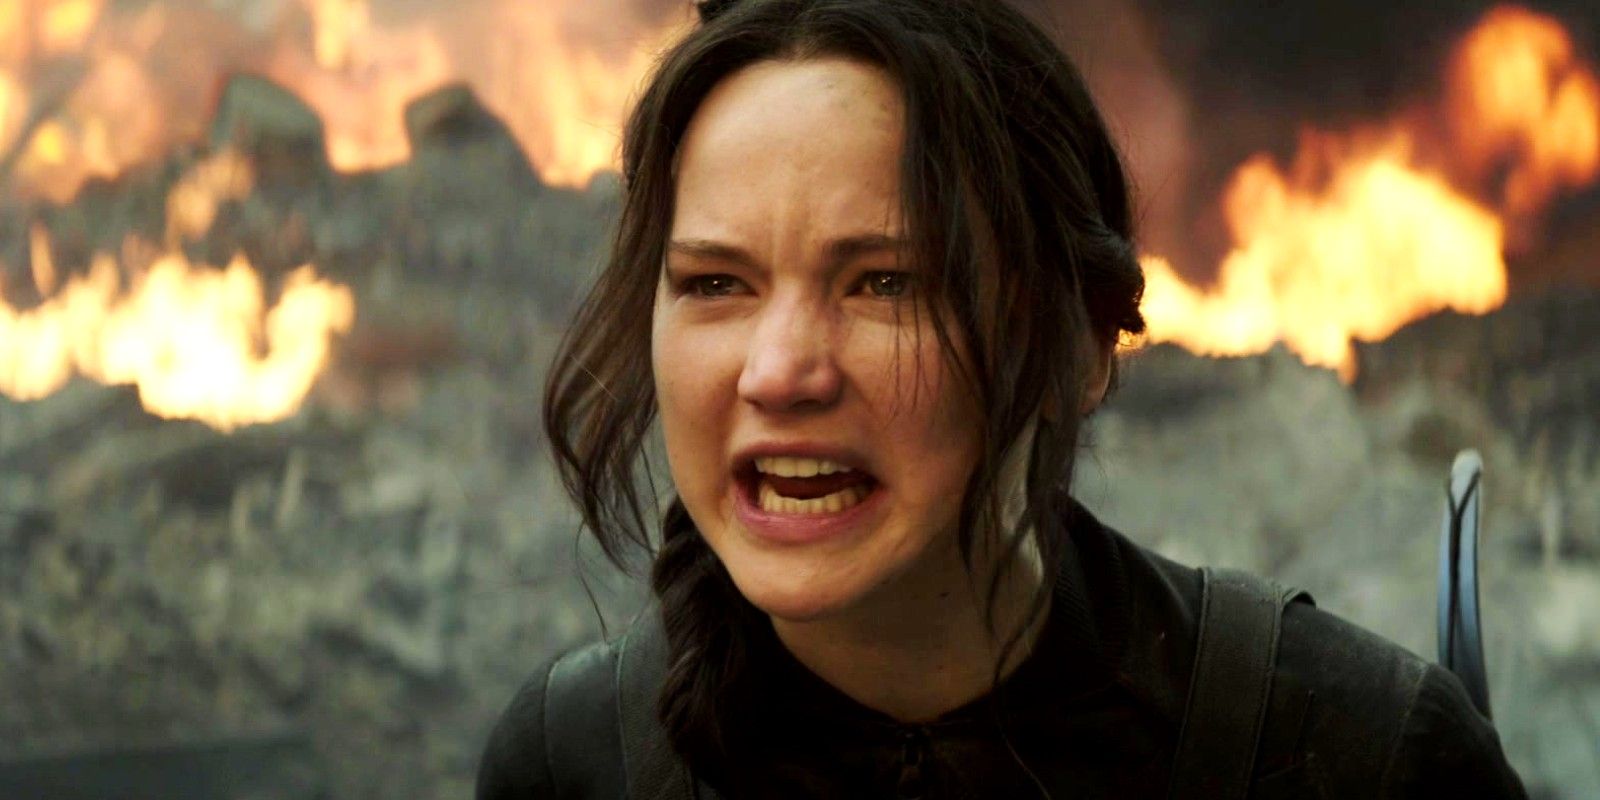 The Ballad Of Songbirds & Snakes Proves Hunger Games Learned The Wrong Lesson From Mockingjay